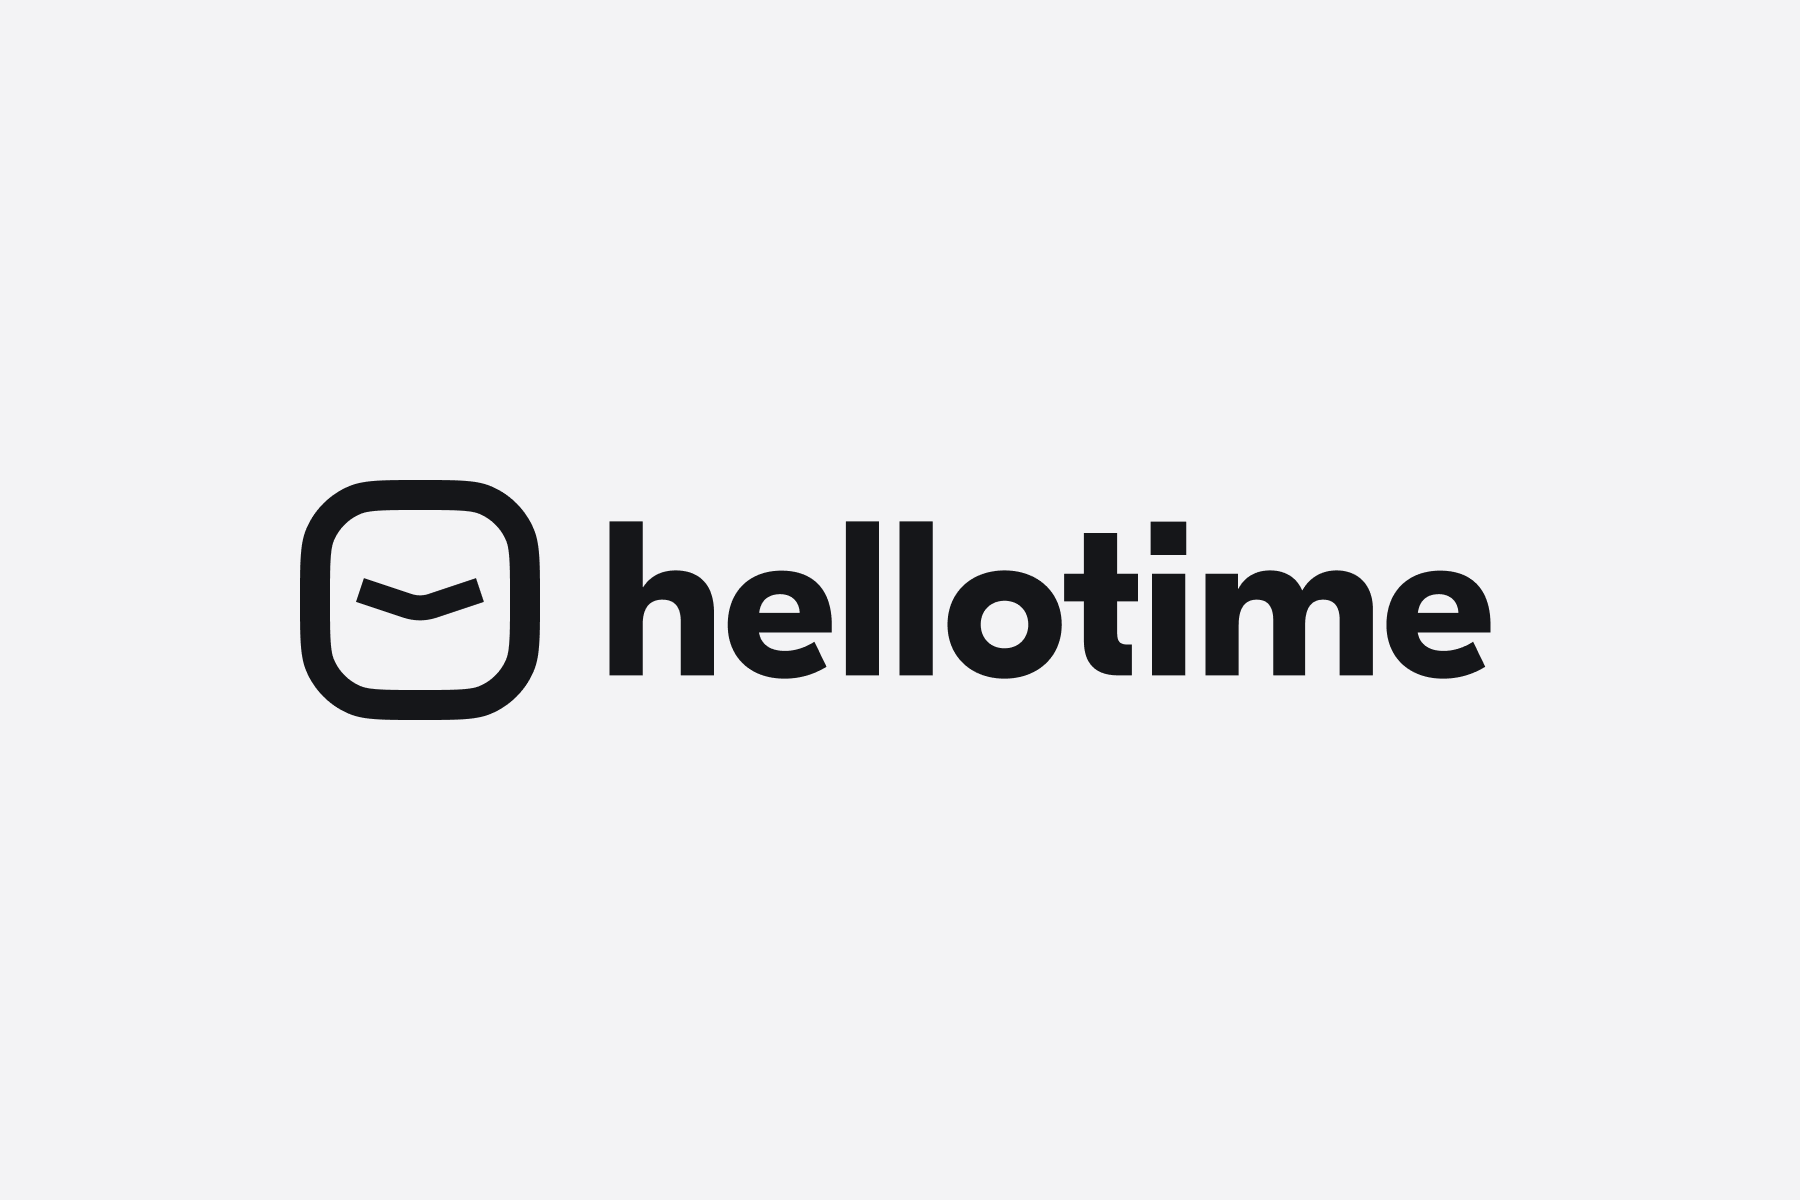 Why we started Hellotime